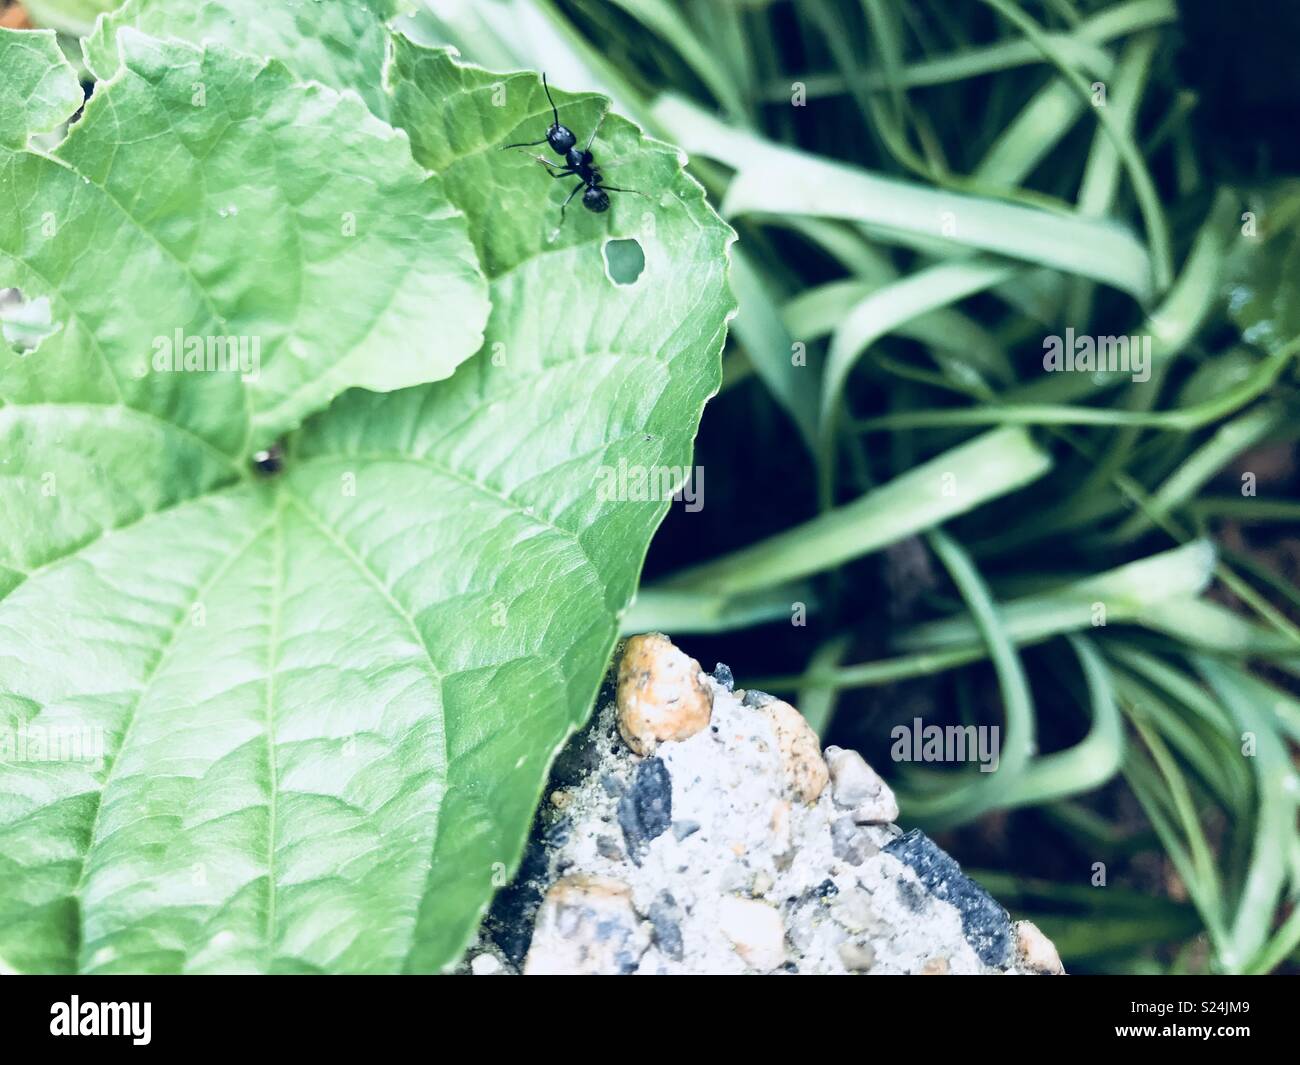 Ant crawling on a leaf Stock Photo